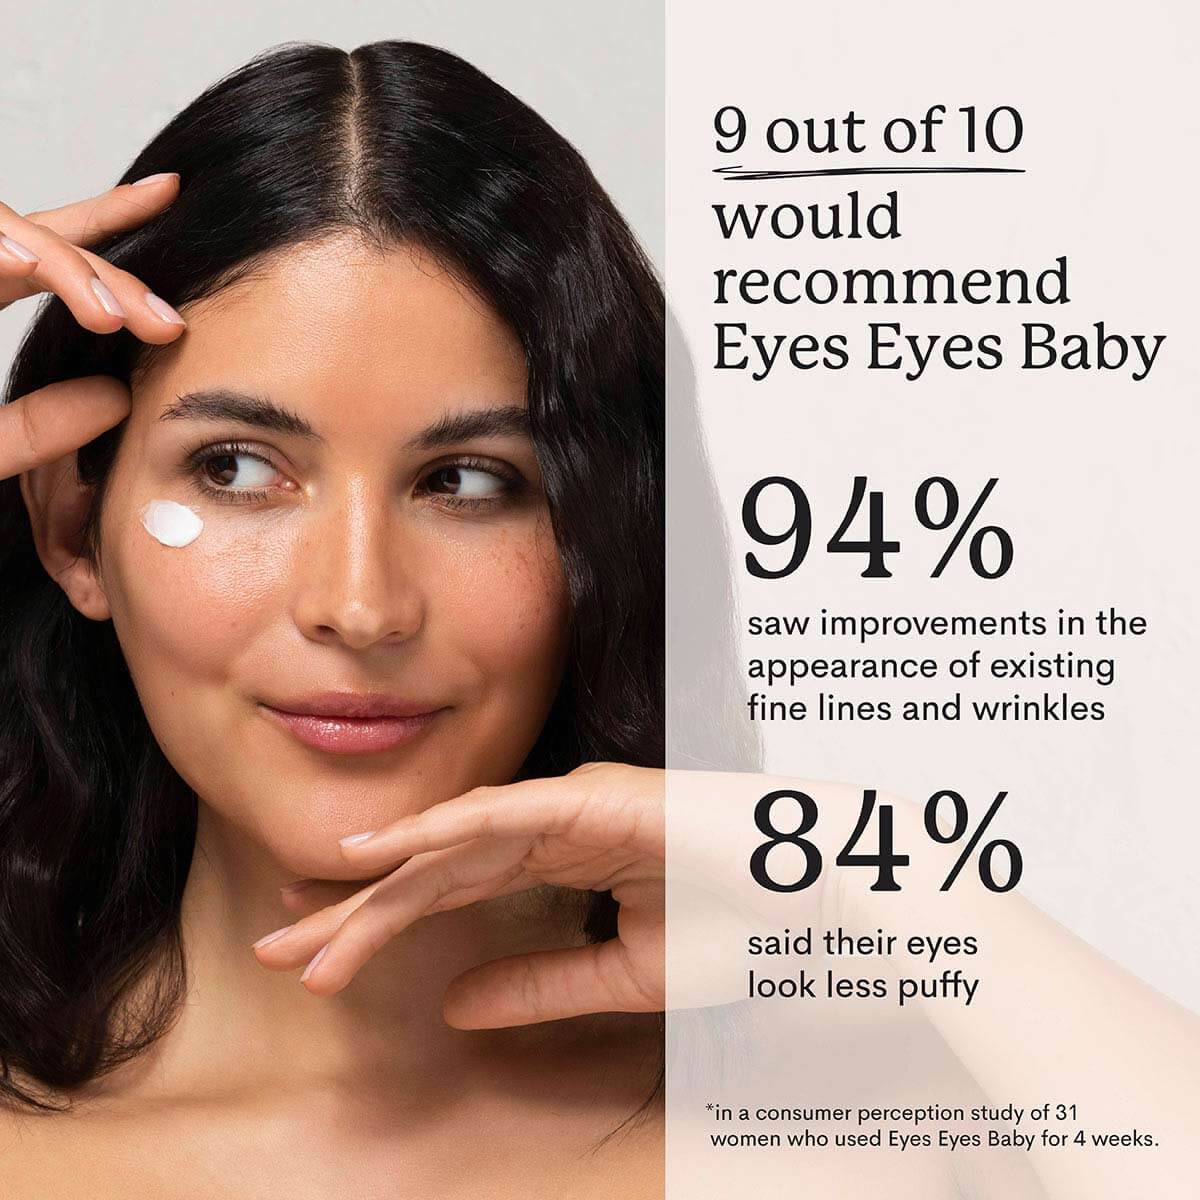 Woman using an anti-aging eye cream and stats showing that 9 out 0f 10 would recommend Eyes Eyes Baby